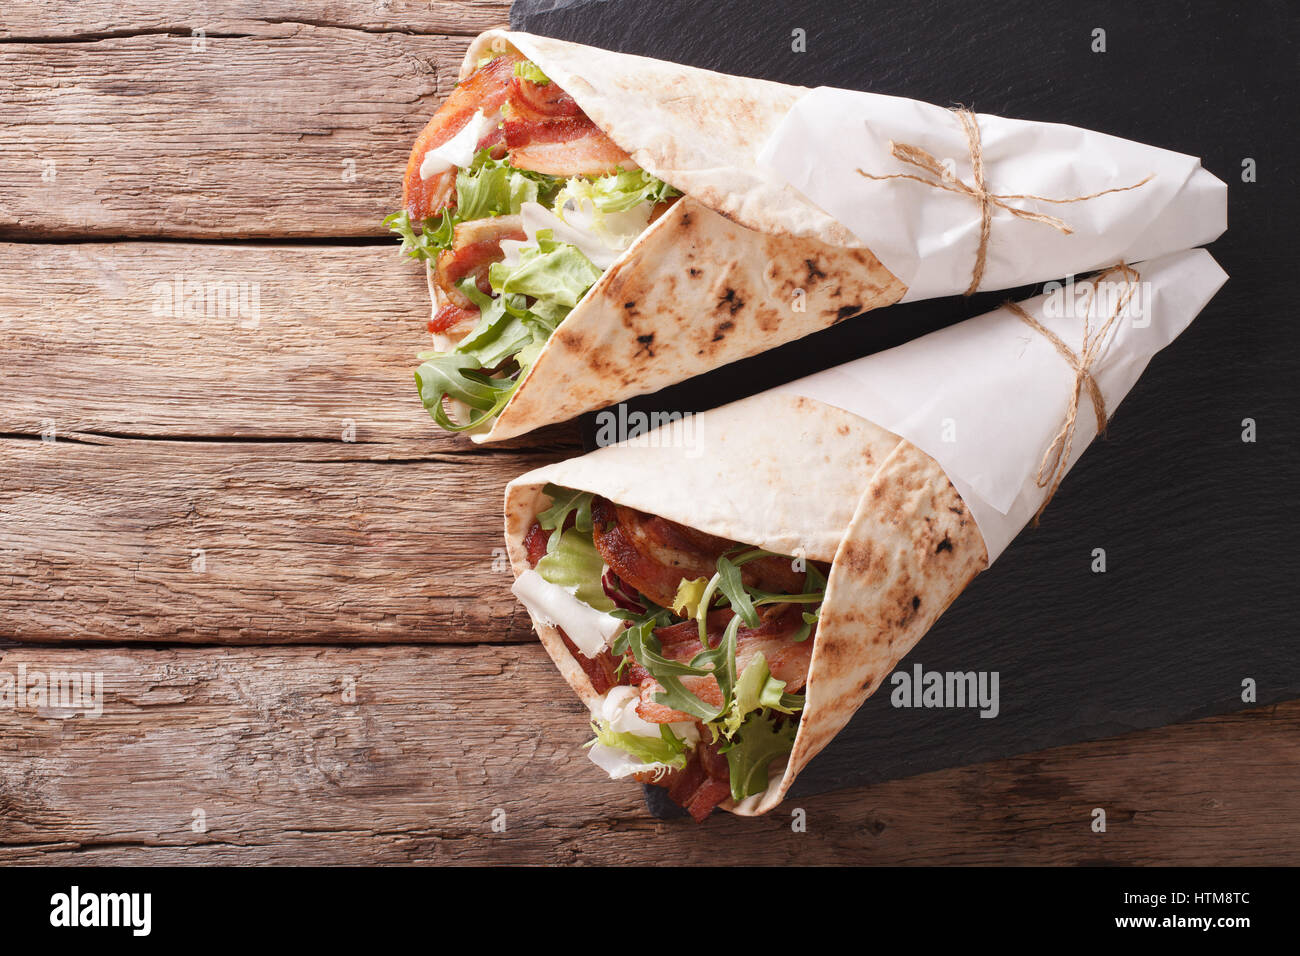 Burritos with bacon and fresh mix of salad close-up on the table. horizontal view from above Stock Photo